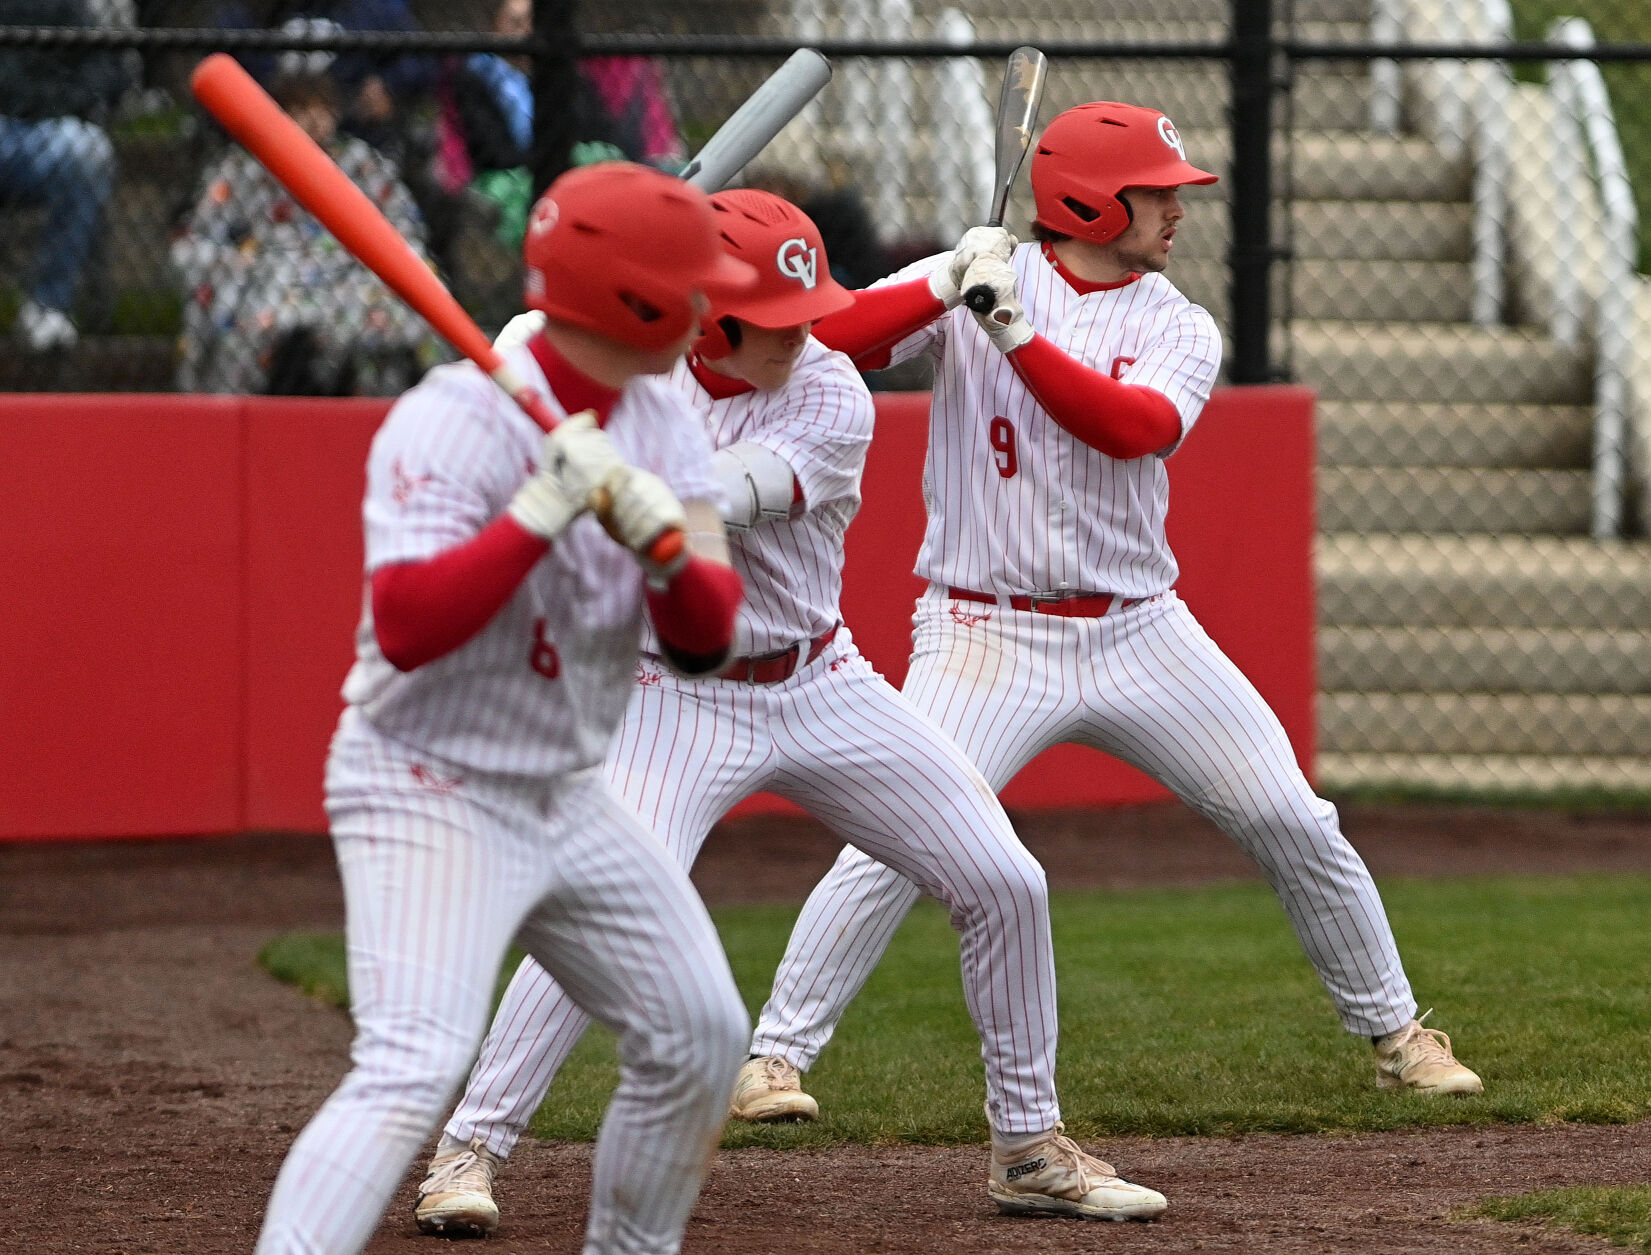 Cumberland Valley Baseball: Incredible 7-Run Comeback Secures Mercy-Rule Win vs. Red Land